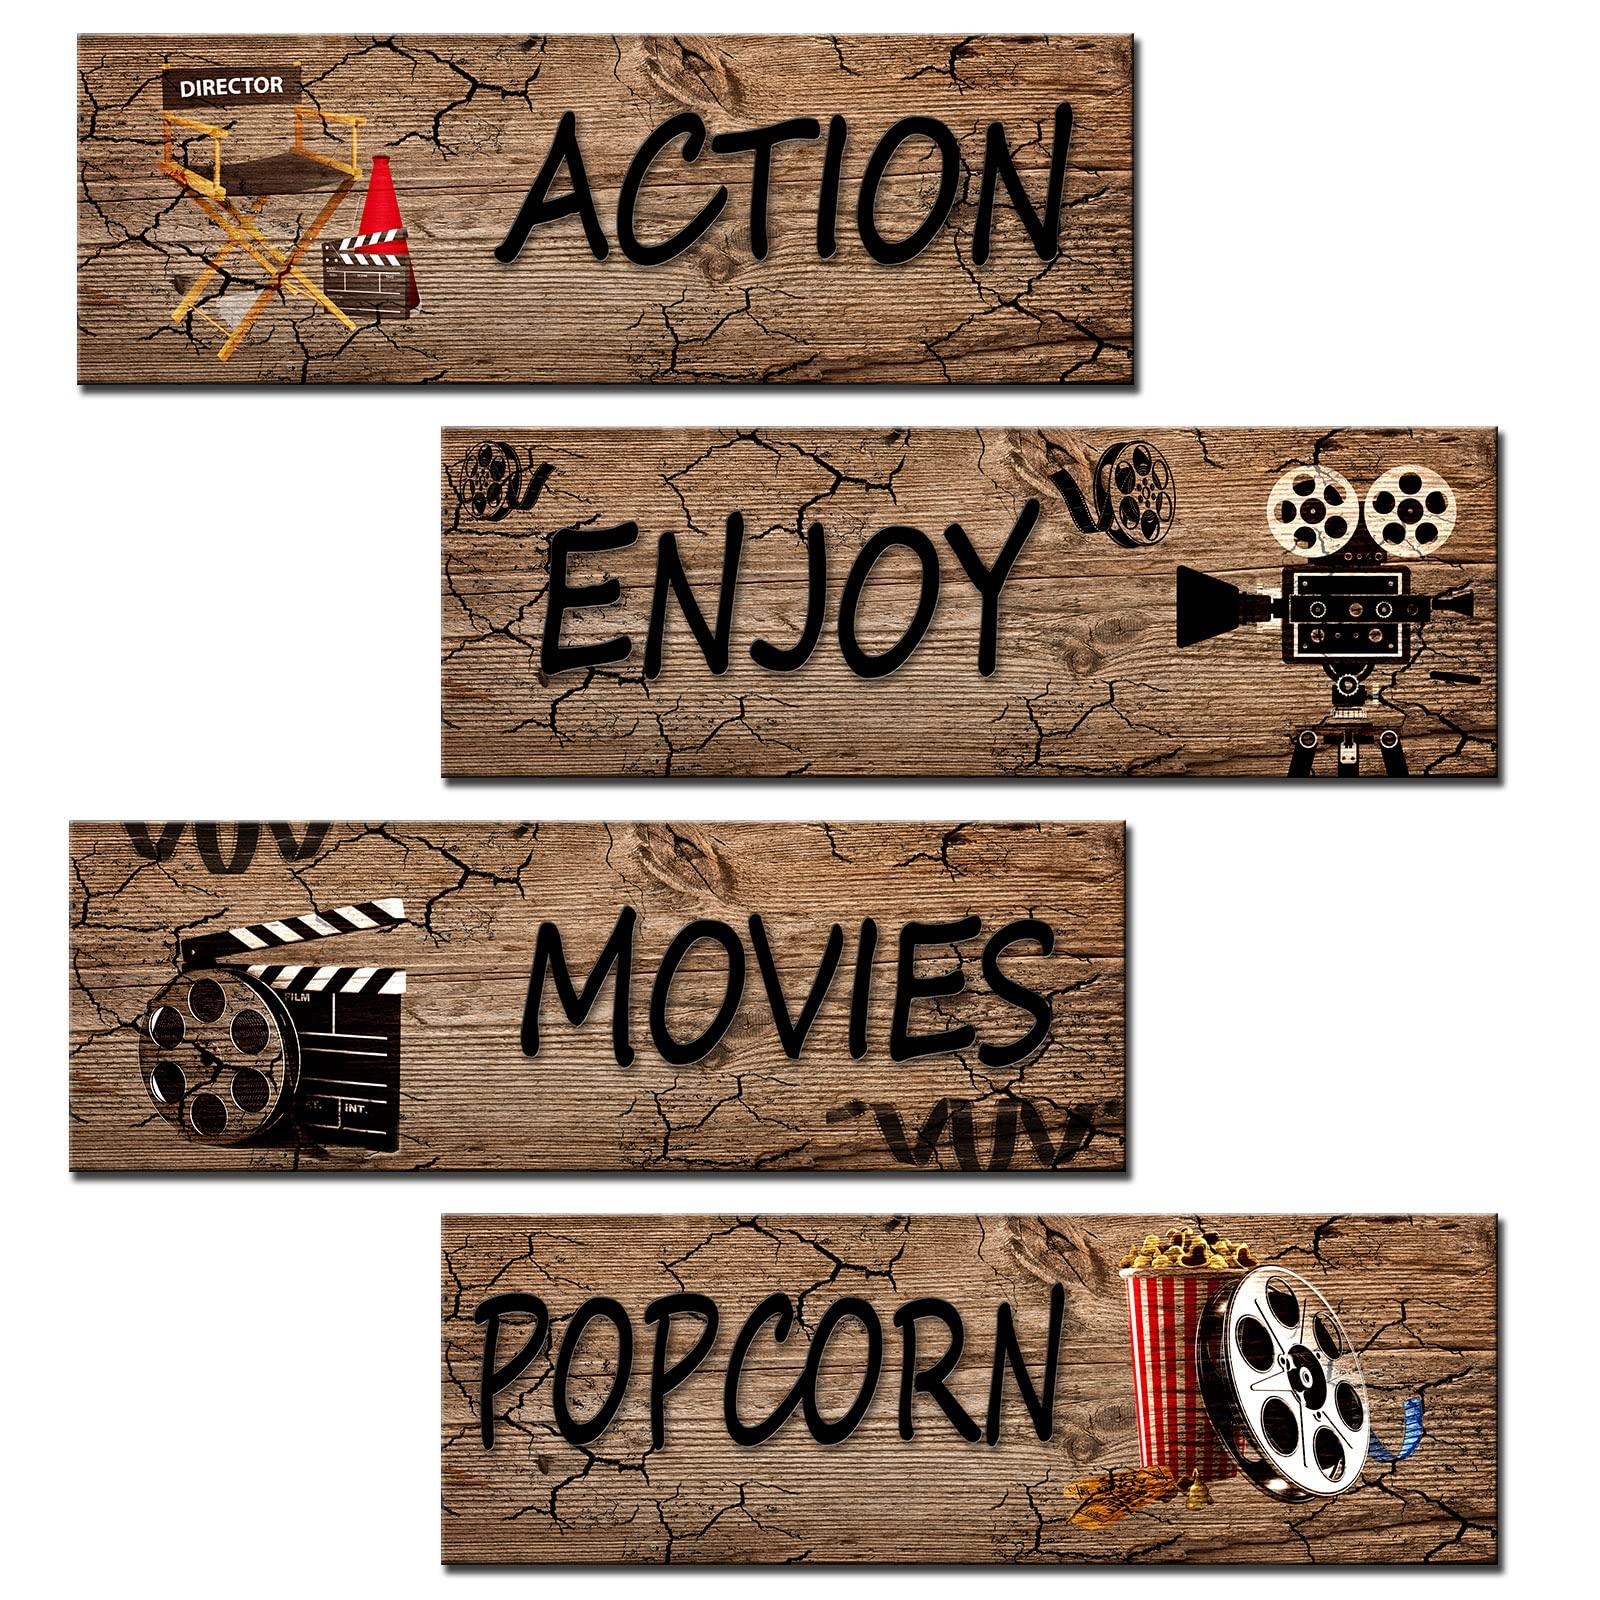 4 Pieces Movies Theatre Wall Art Film Reel Wood Wall Plaque Action,Movies,Enjoy,Popcorn Wooden Signs Rustic Home Theatre Decor Film Clapperboard Wall Decor Retro Filmmaking Chalkboard Wall Art(Black)